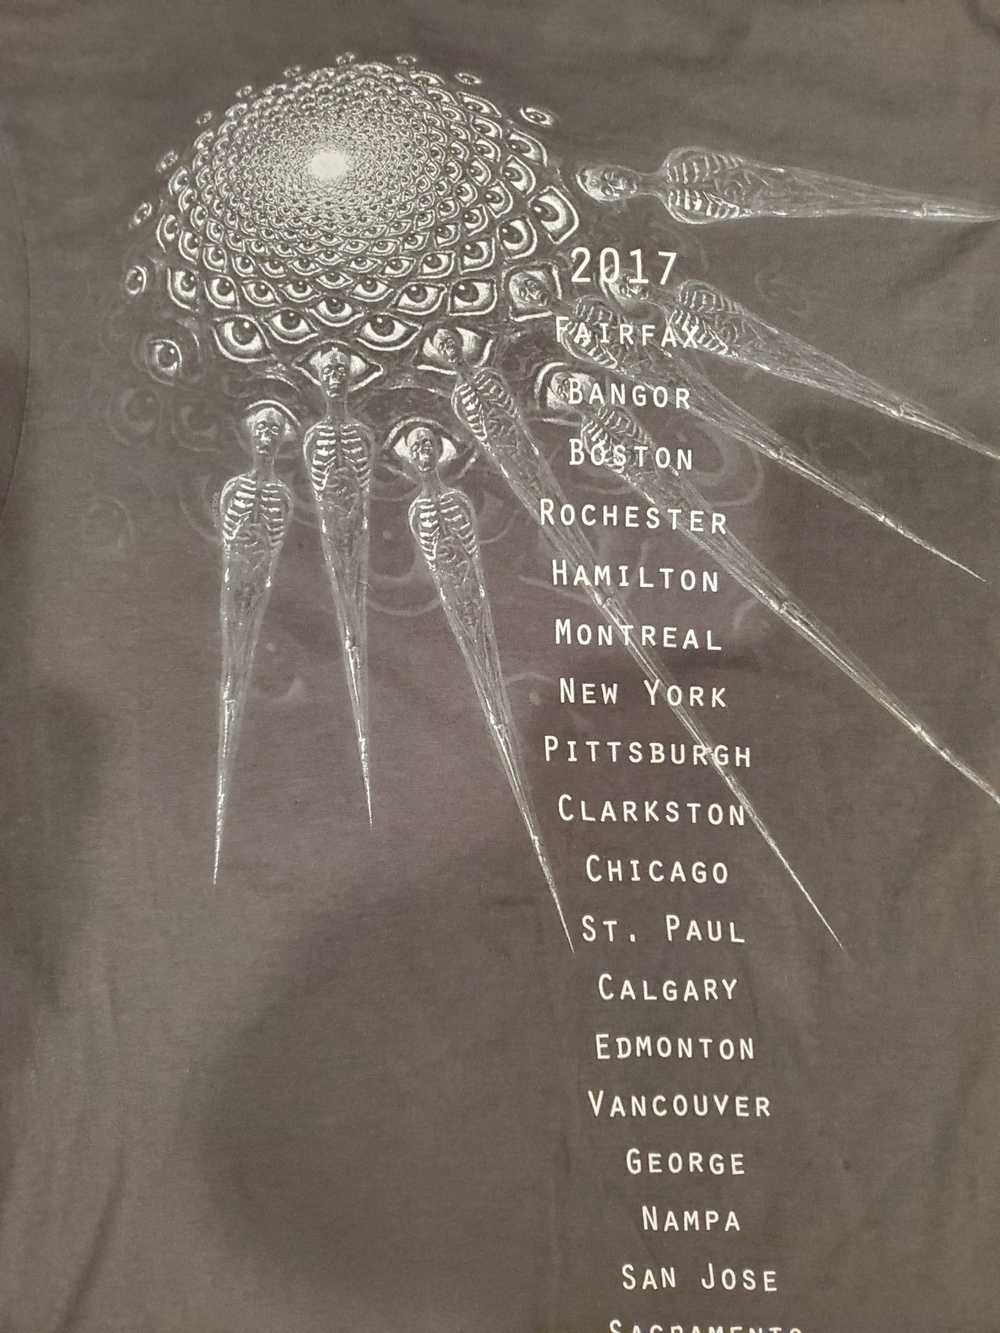 Anvil Tool concert shirt double sided size large - image 3